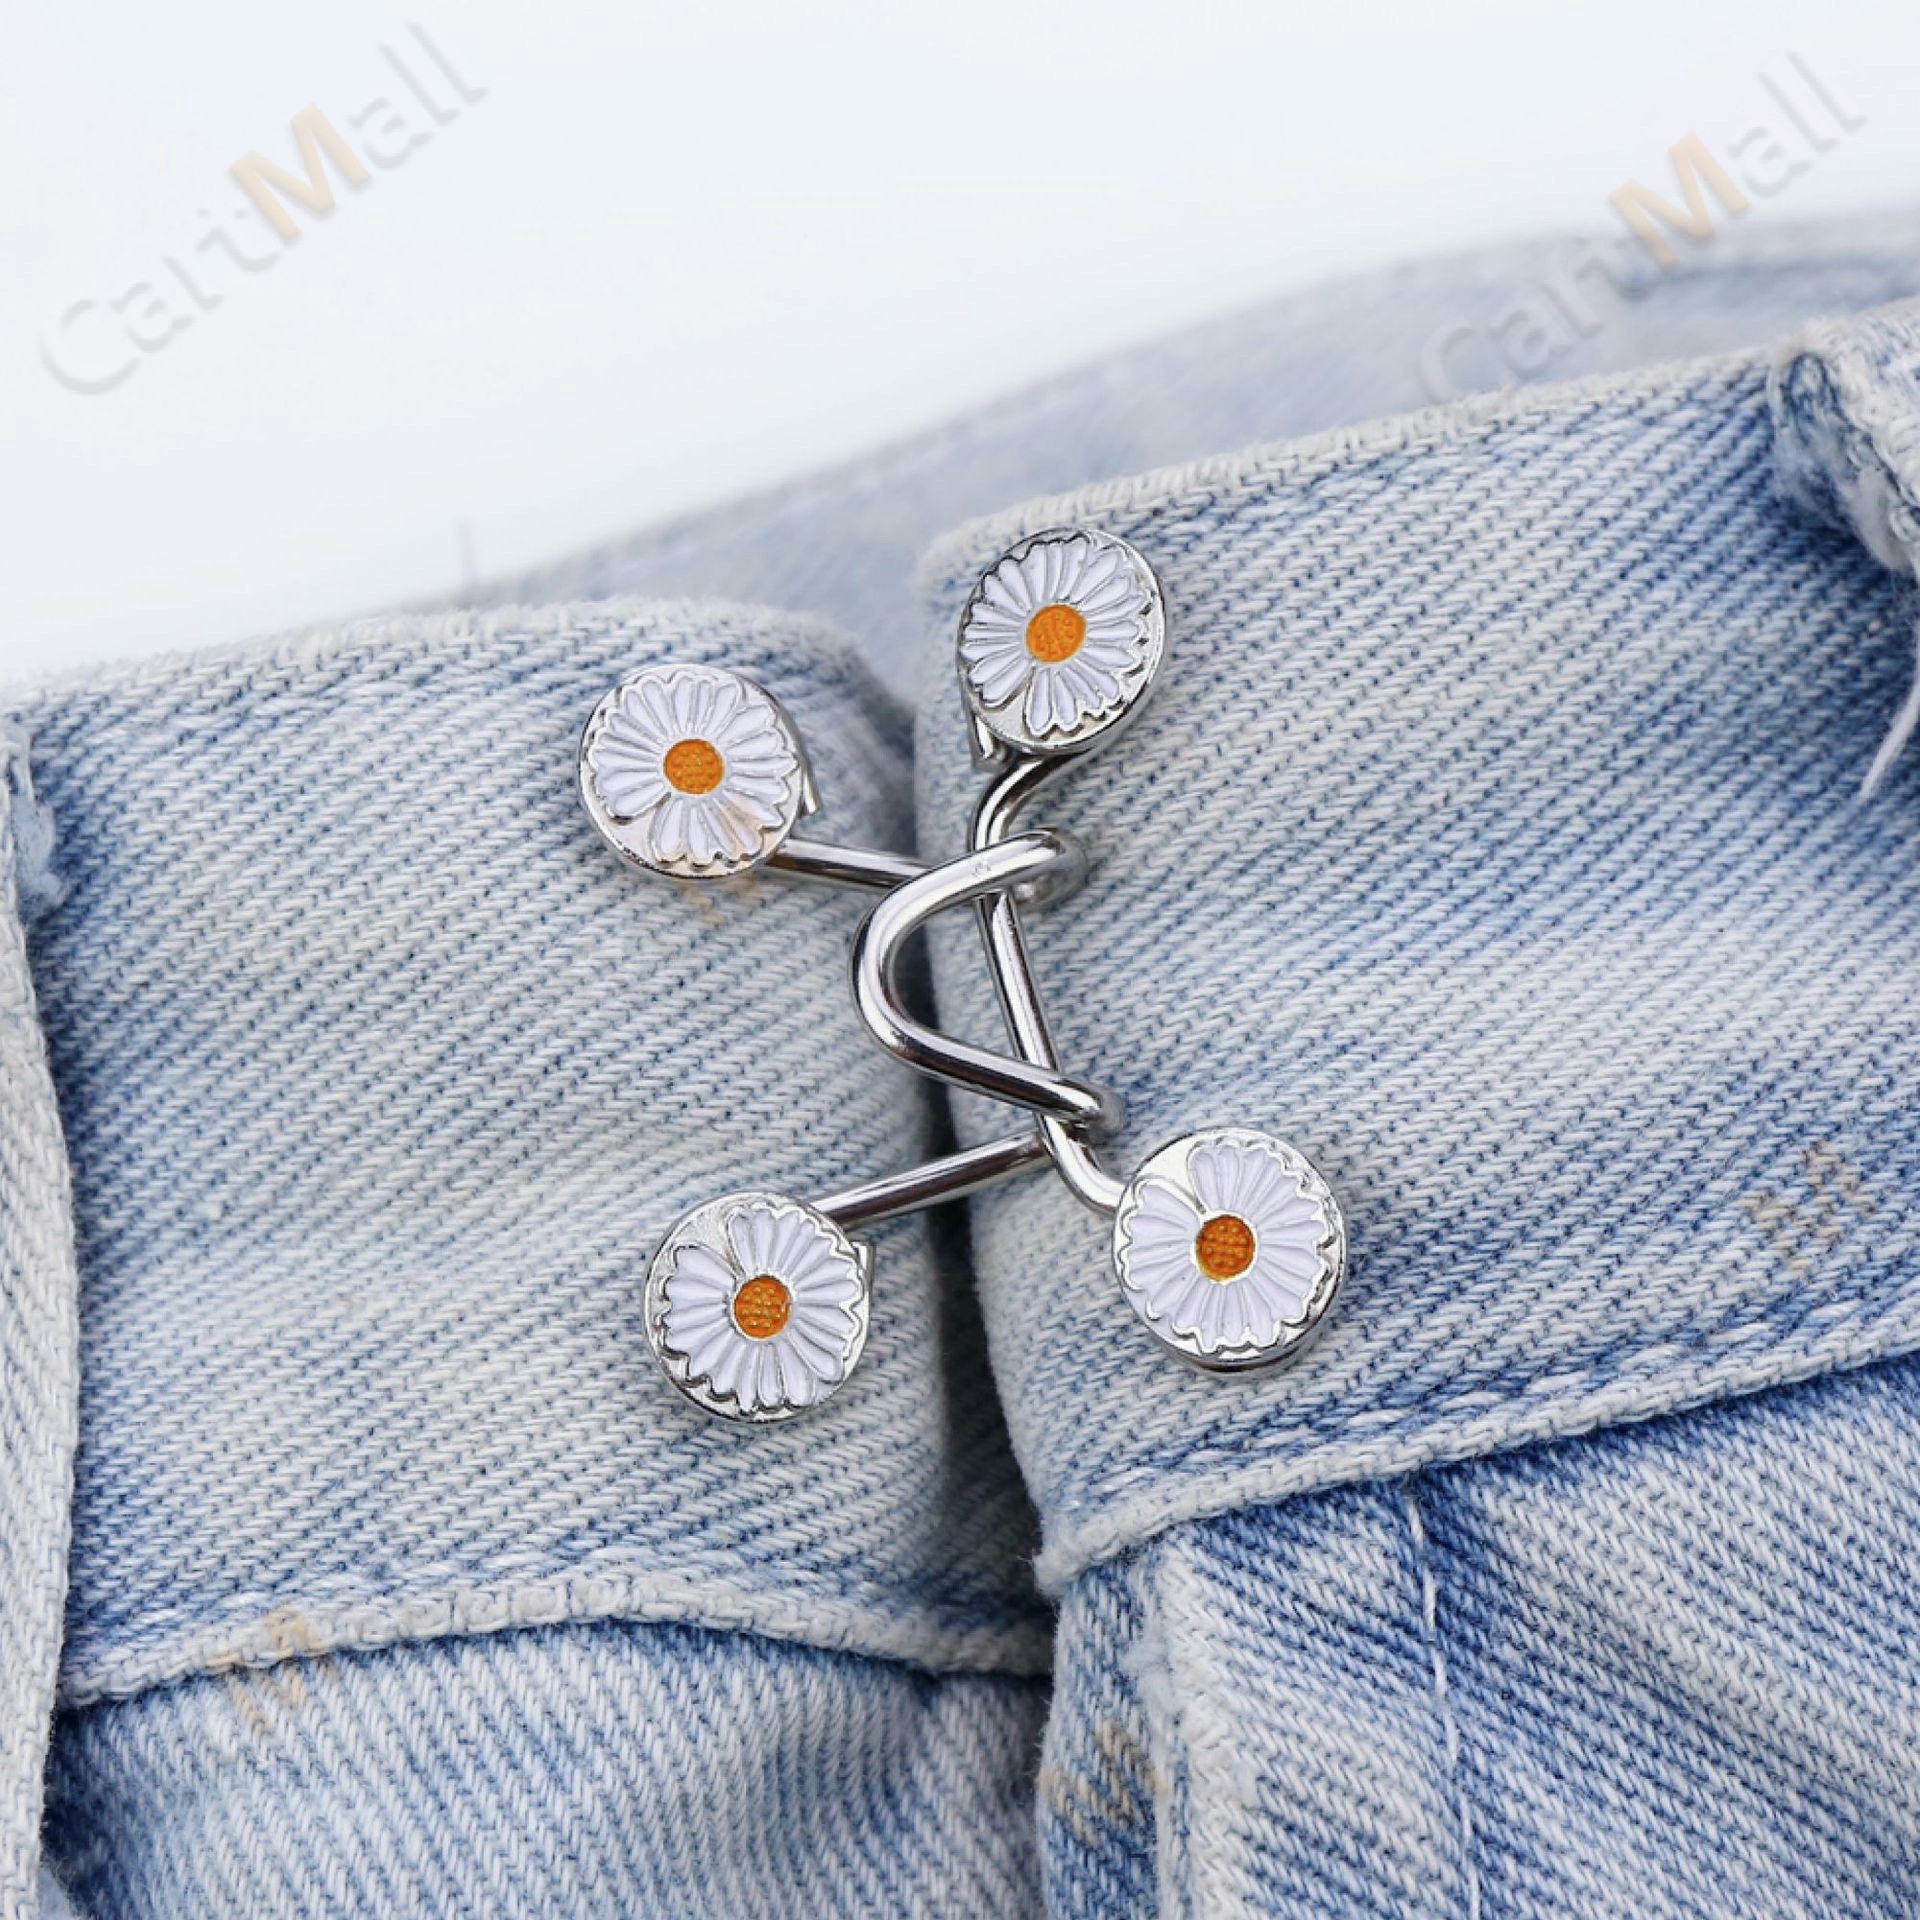 Candy MALL - 【12PCS Button Pins for Jeans】---You will receive 12PCS jean  buttons per bag. The diameter of the jean button is 17mm. You can use these jean  button pins to adjust